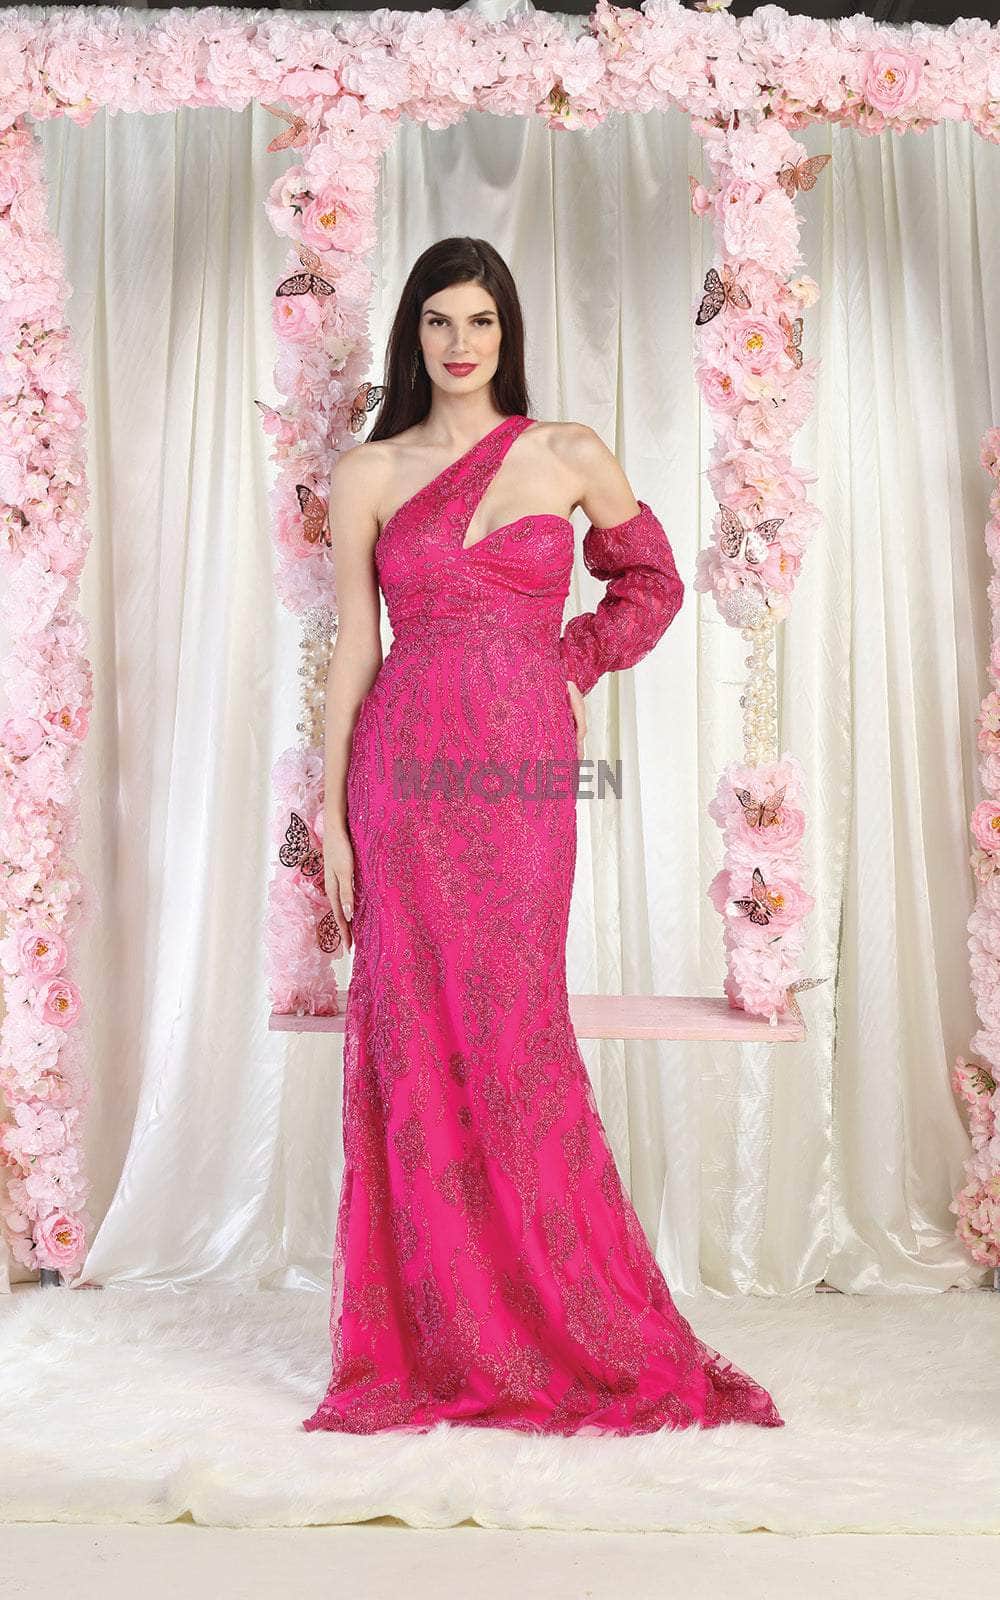 May Queen RQ7997 - Asymmetrical Embellished Gown Special Occasion Dress